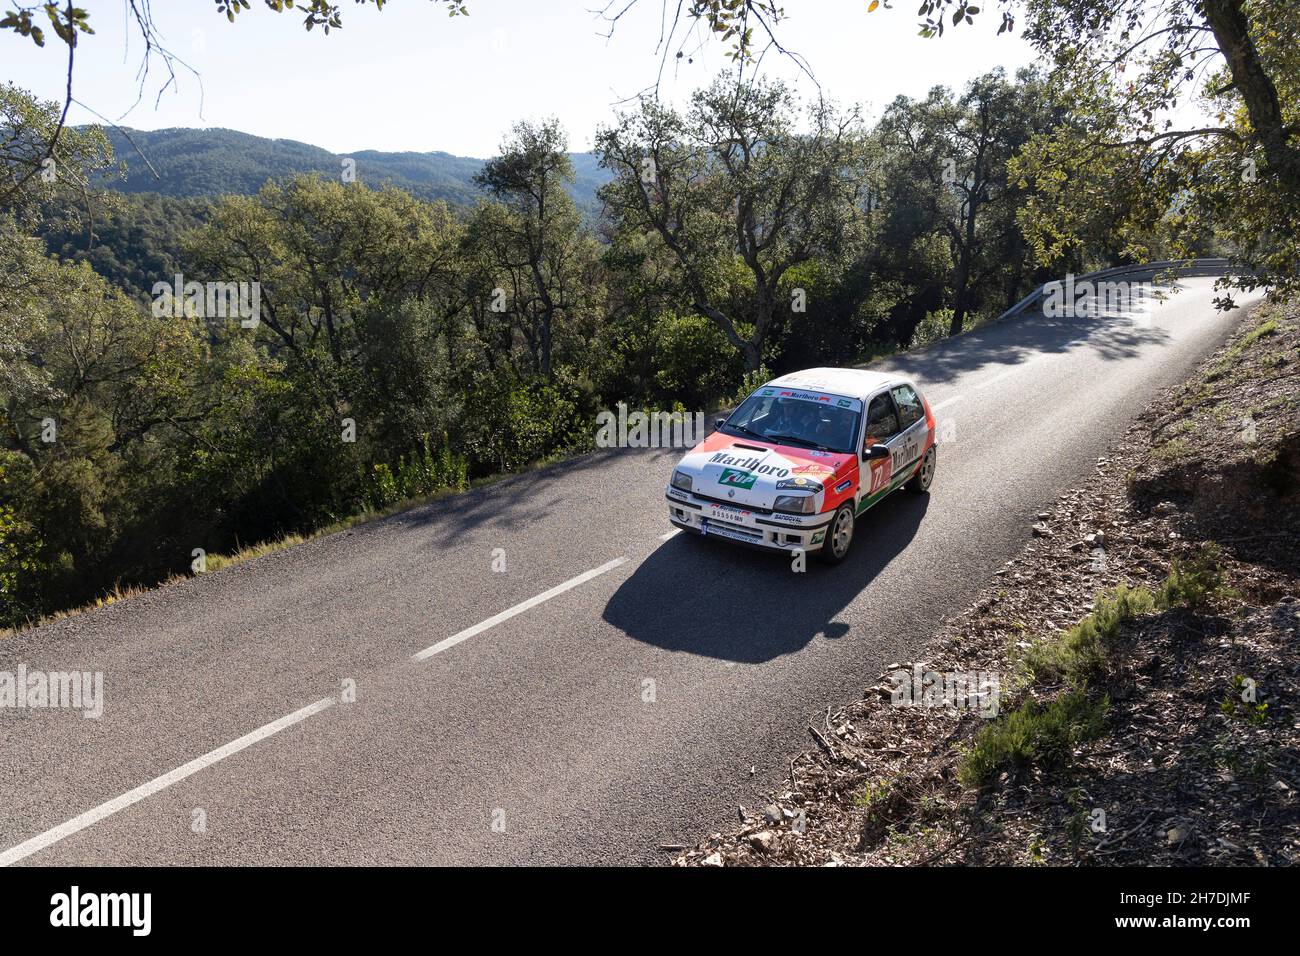 Renault Clio 16 valve taking part in the timed section of the Rally Costa Brava 2021 in Girona, Spain Stock Photo